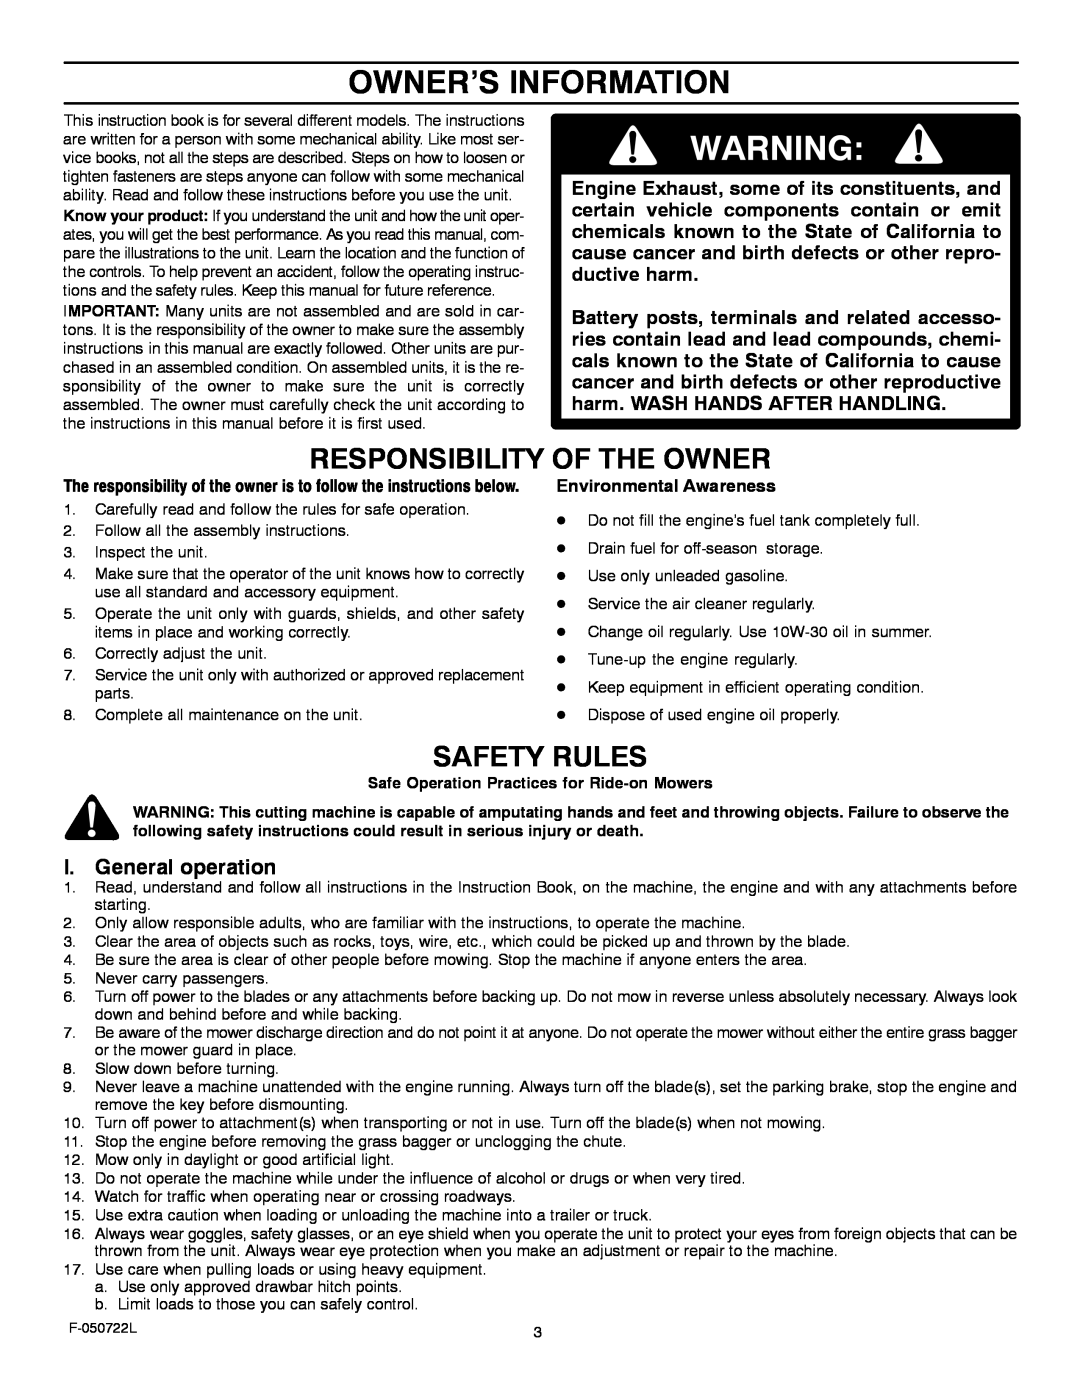 Murray 425001x99A manual Owner’S Information, Responsibility Of The Owner, Safety Rules, I. General operation 